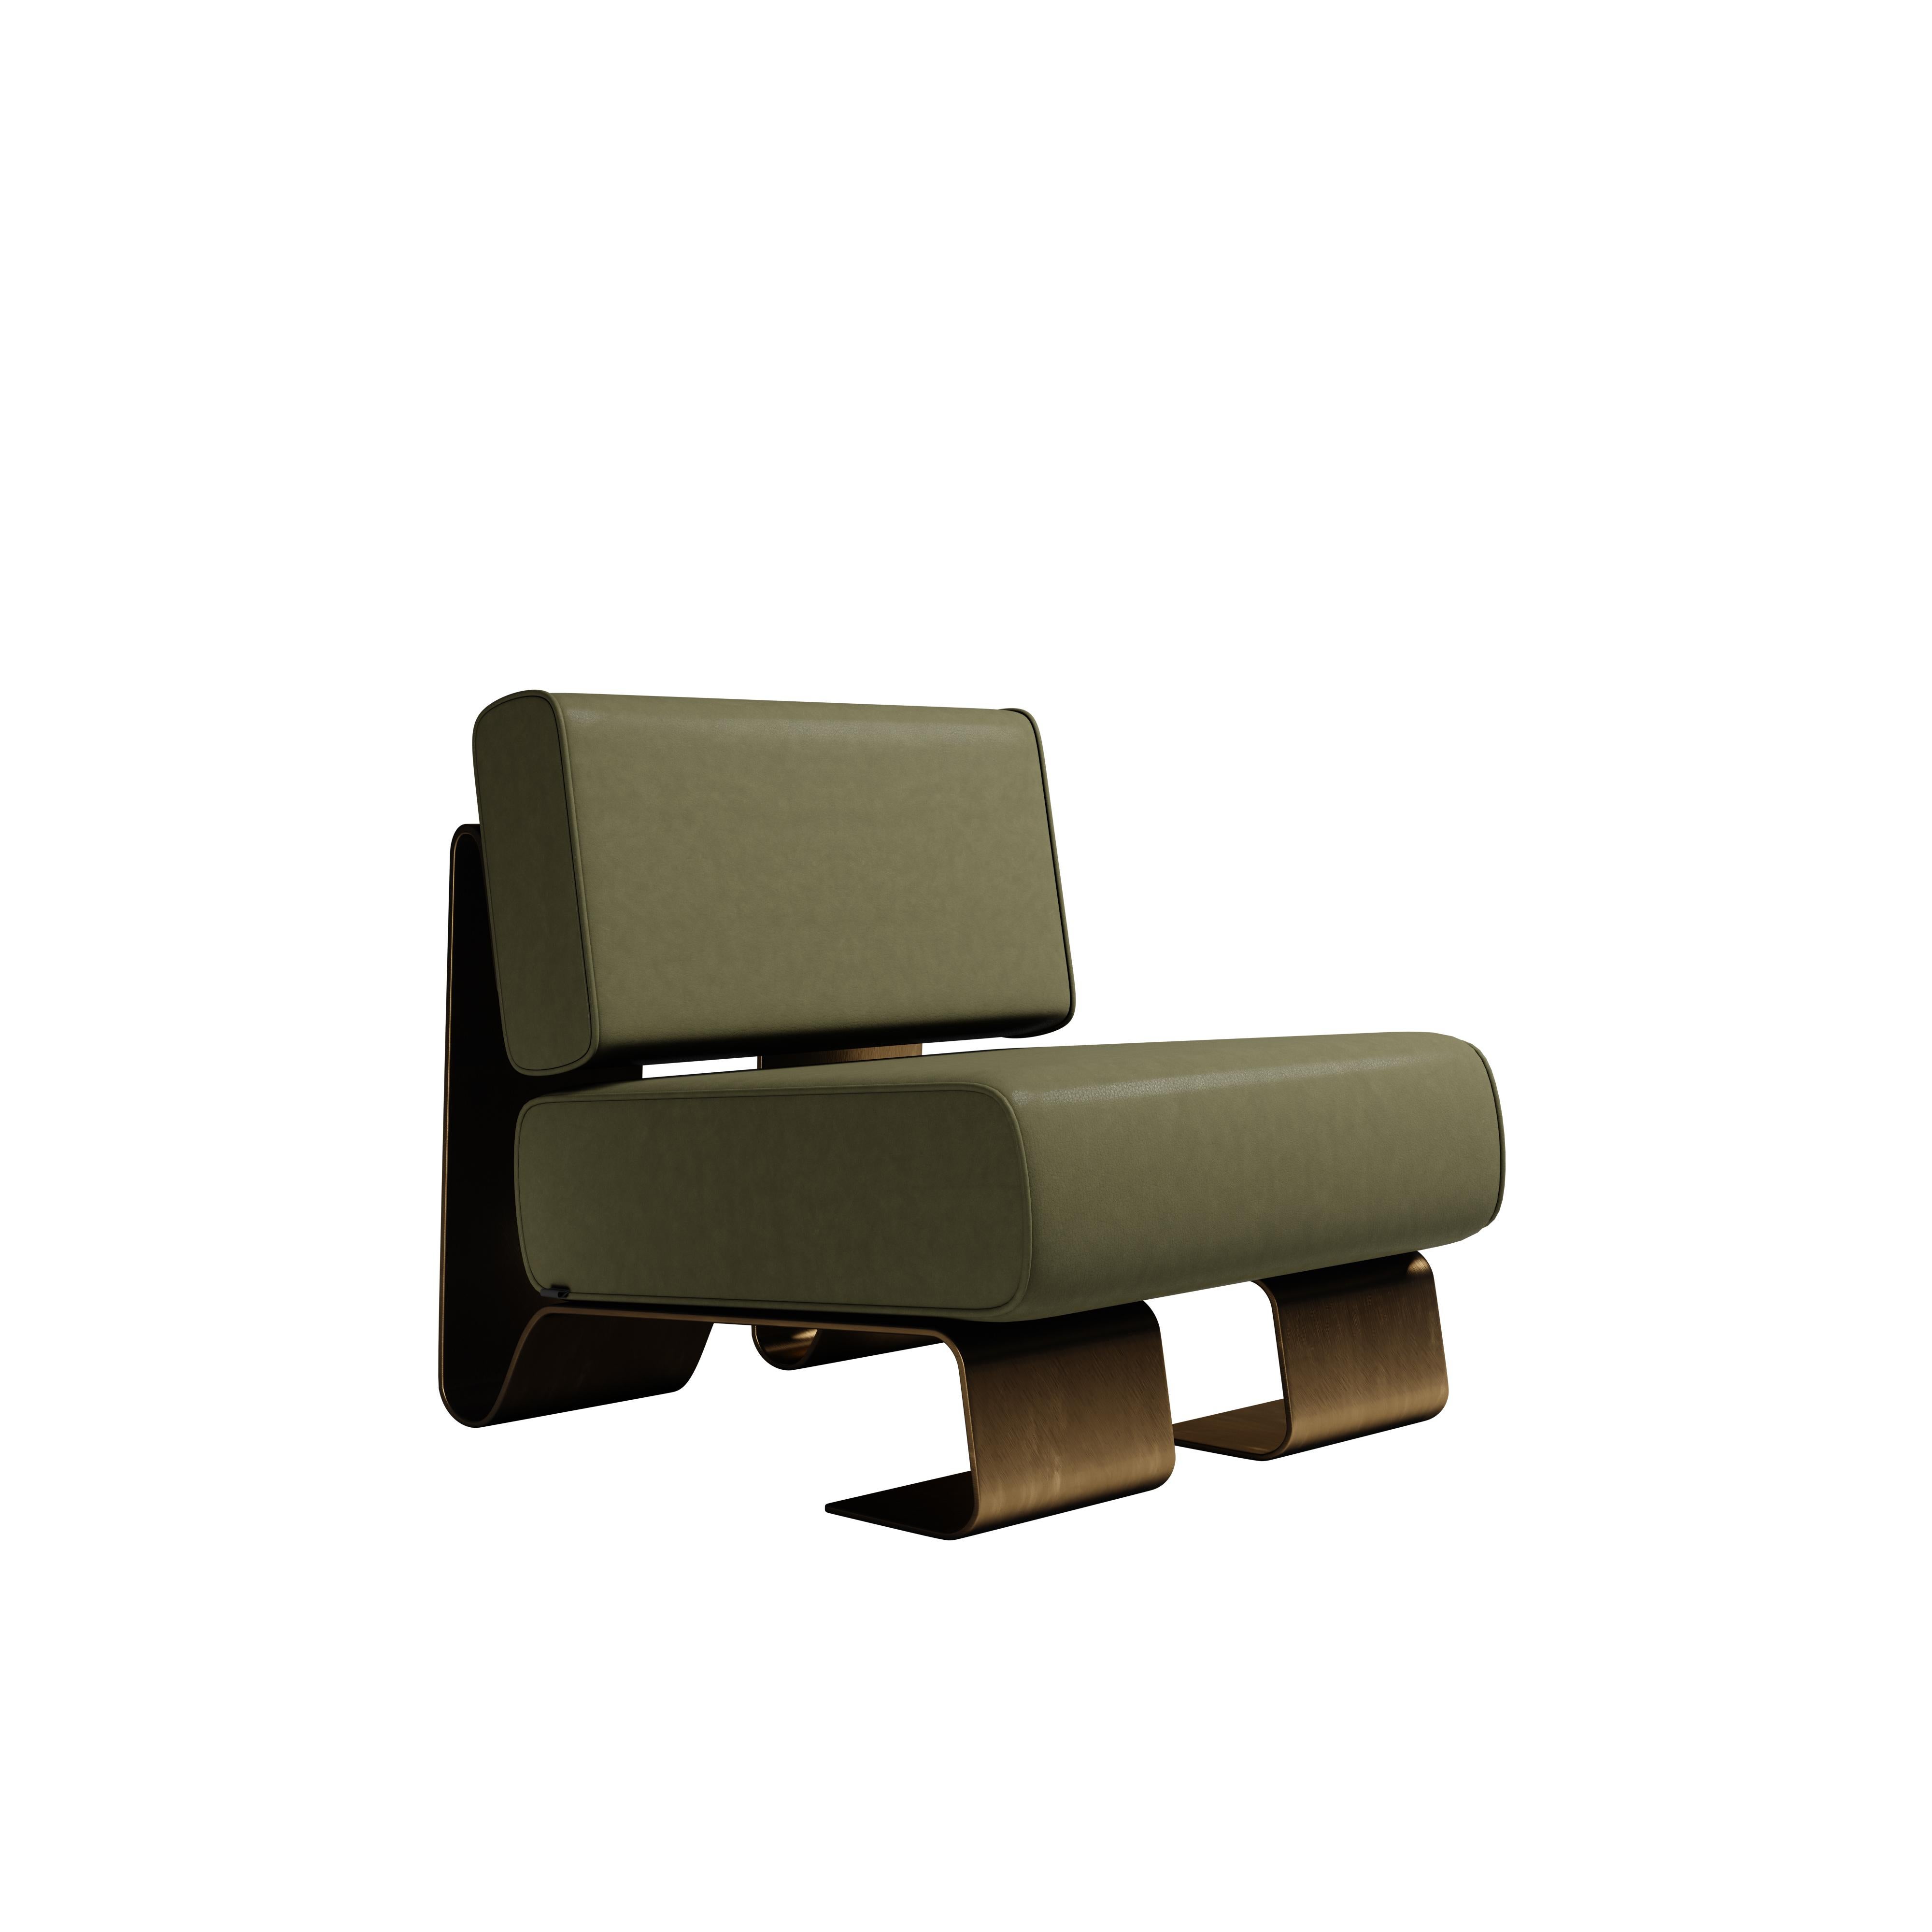 Portuguese 21st Century Rushmore Armchair Brass Leather by Porus Studio For Sale